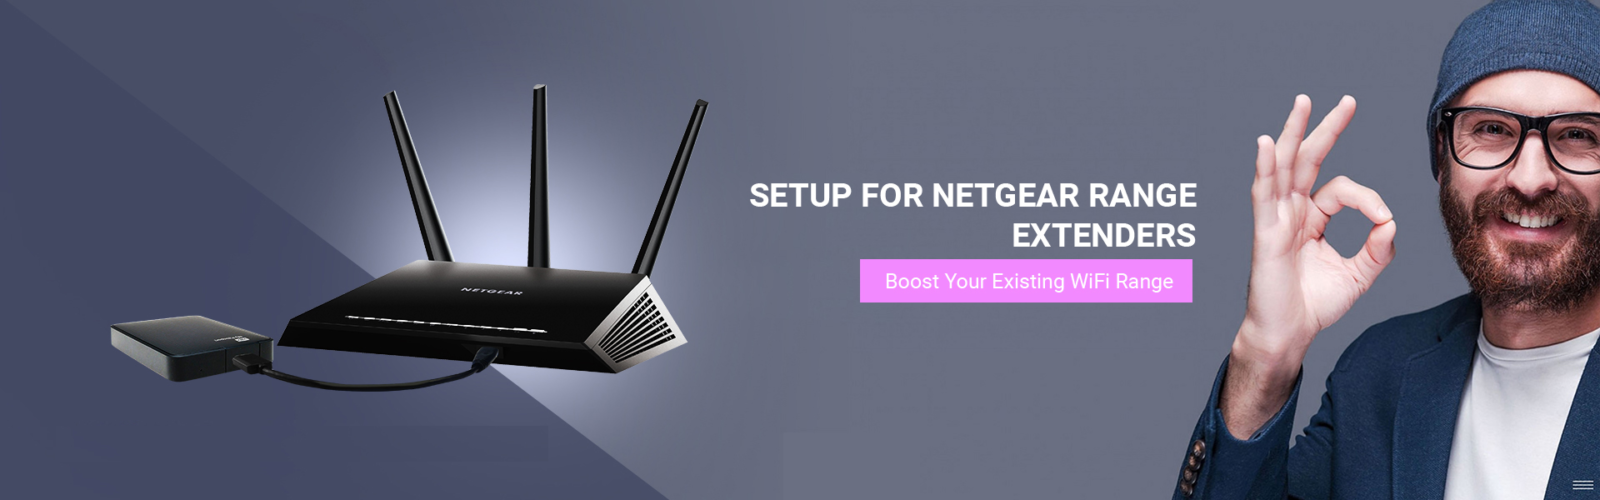 how to set up a new password for netgear router